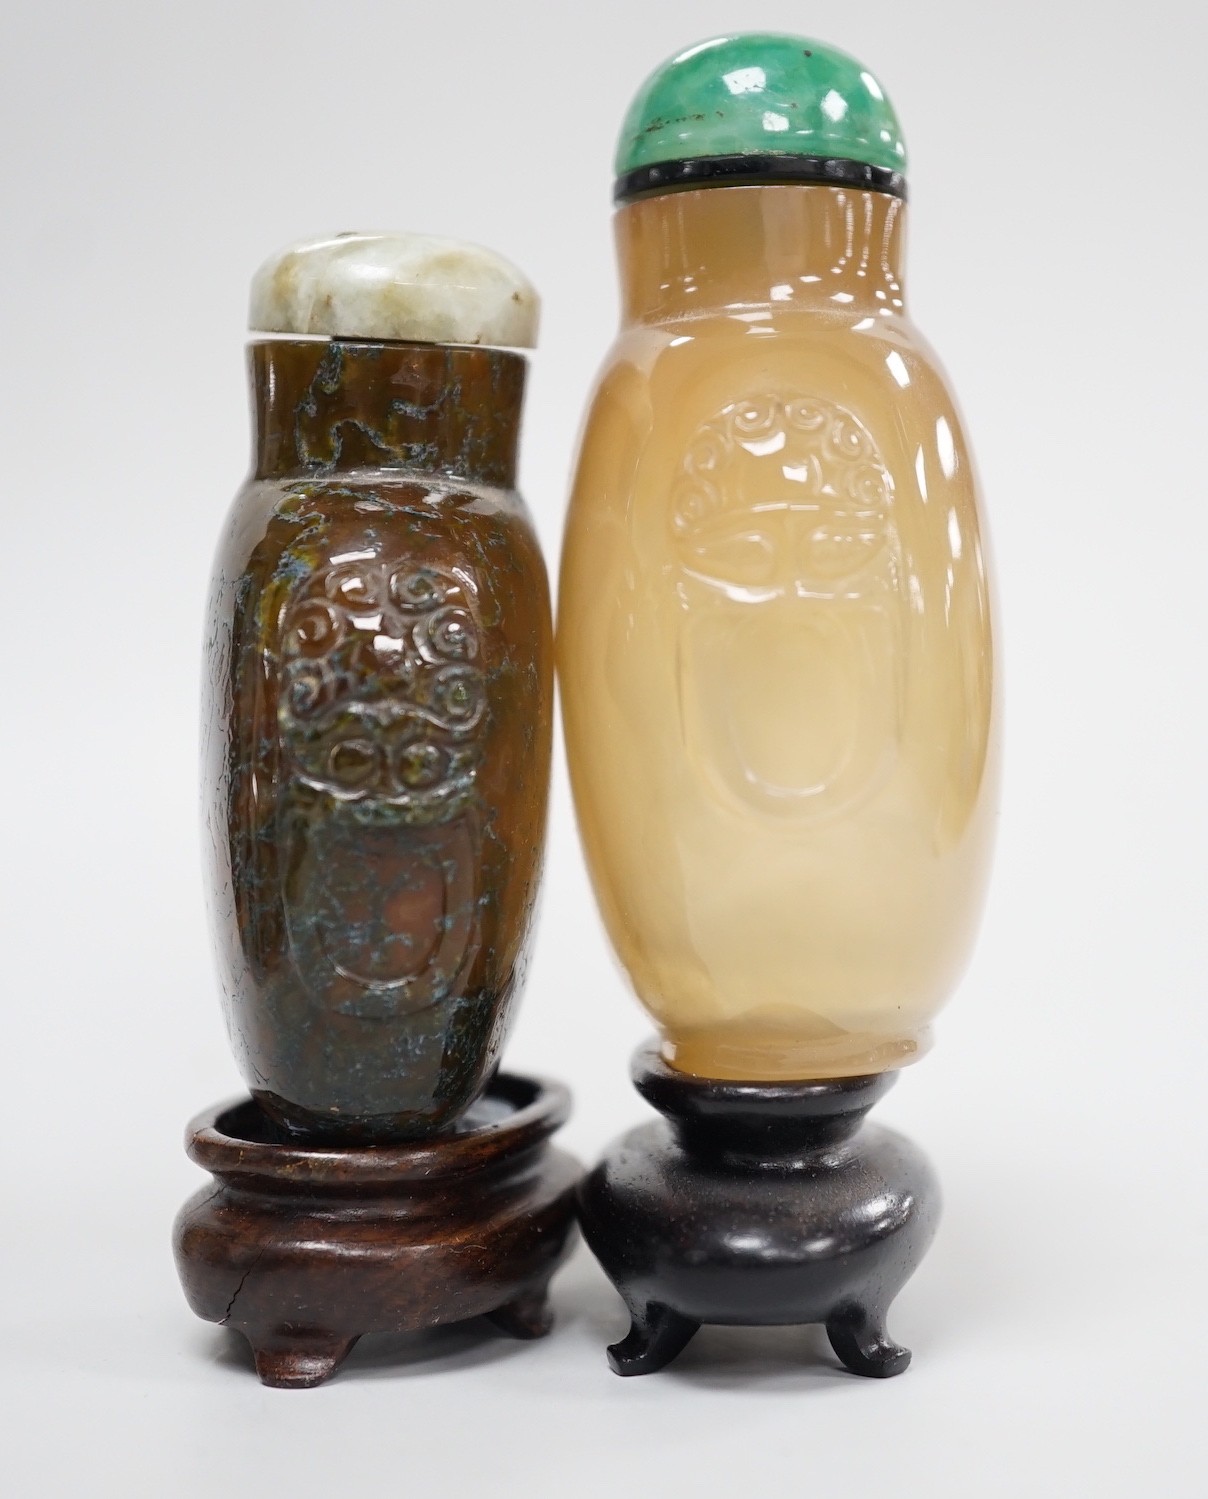 A Chinese honey coloured agate mask and ring handled snuff bottle and a dendritic chalcedony (moss agate) mask and ring handled snuff bottle, 5.7cm, both 1780-1880